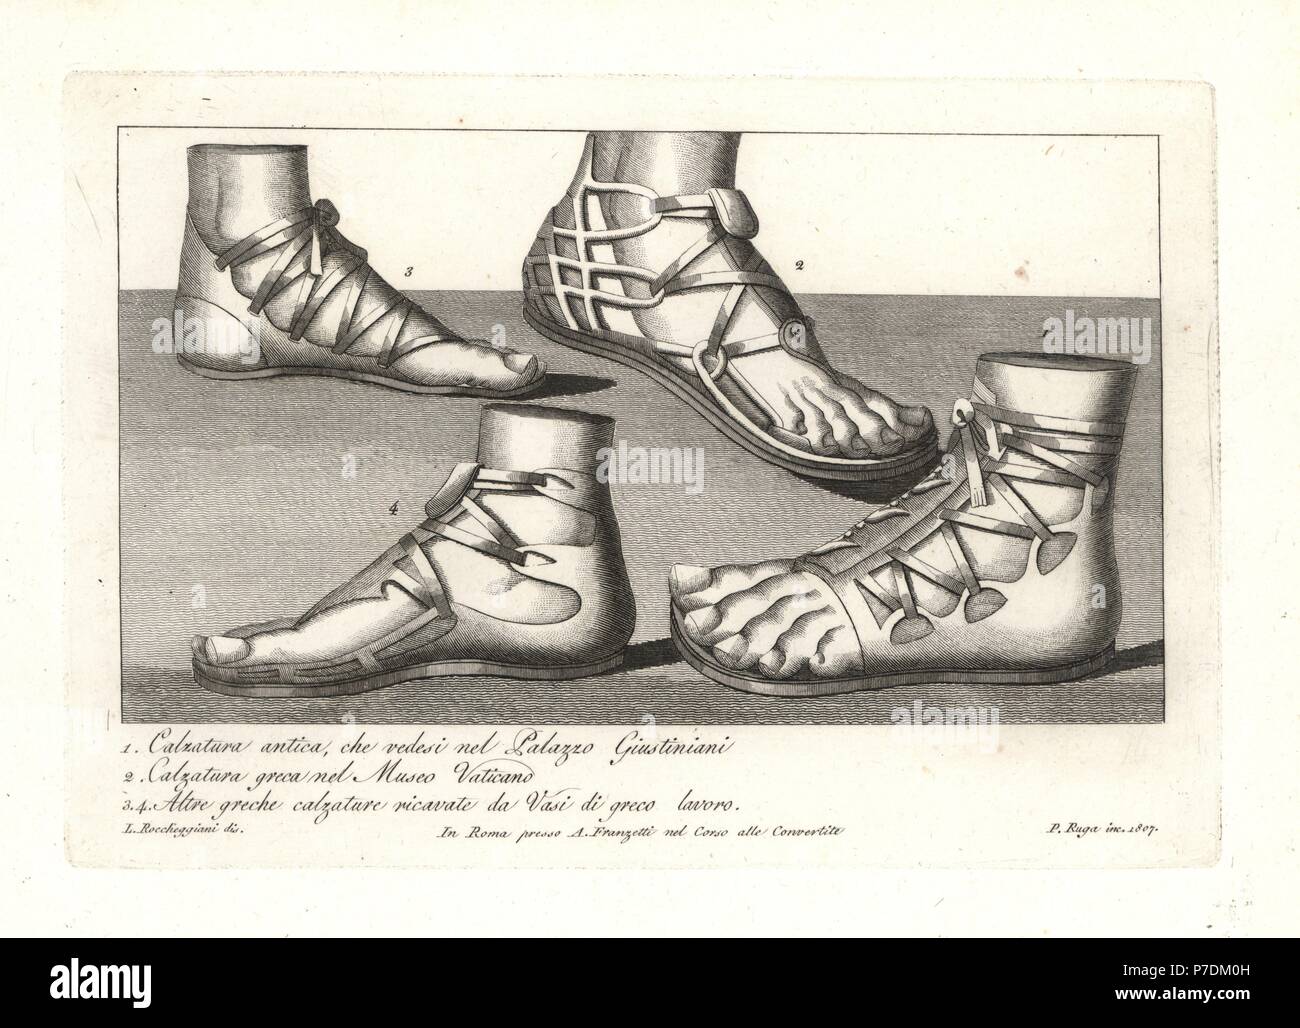 Ancient shoe from the Palazzo Giustiniani 1, ancient Greek shoe from the  Vatican Museum 2, and other Greek shoes from Greek vases 3,4. Copperplate  engraving by Pietro Ruga after an illustration by